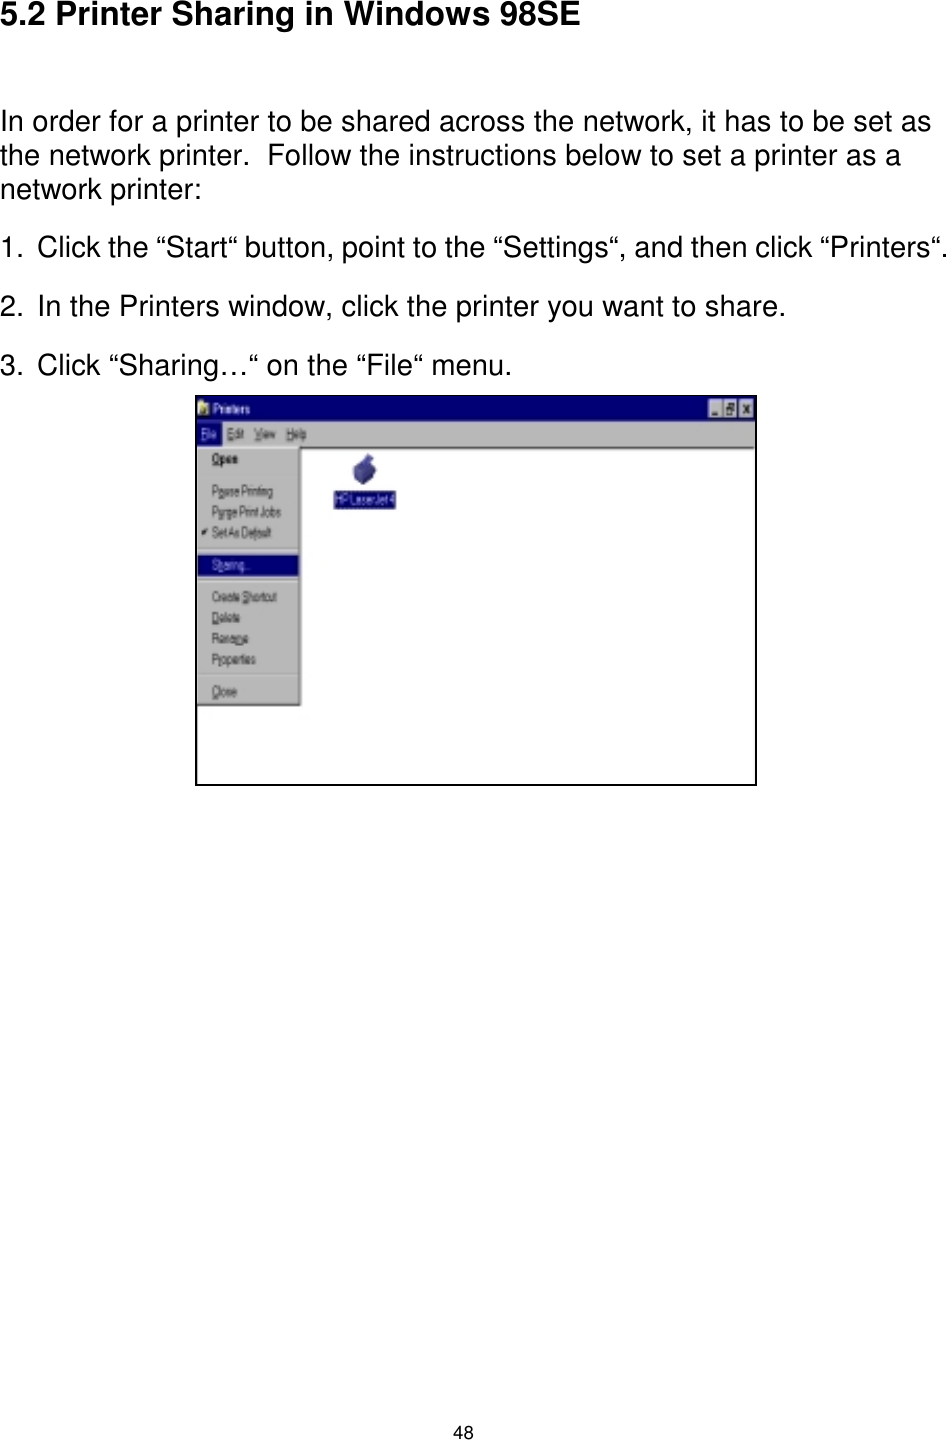  48 5.2 Printer Sharing in Windows 98SE  In order for a printer to be shared across the network, it has to be set as the network printer.  Follow the instructions below to set a printer as a network printer: 1.  Click the “Start“ button, point to the “Settings“, and then click “Printers“. 2.  In the Printers window, click the printer you want to share. 3.  Click “Sharing…“ on the “File“ menu. 